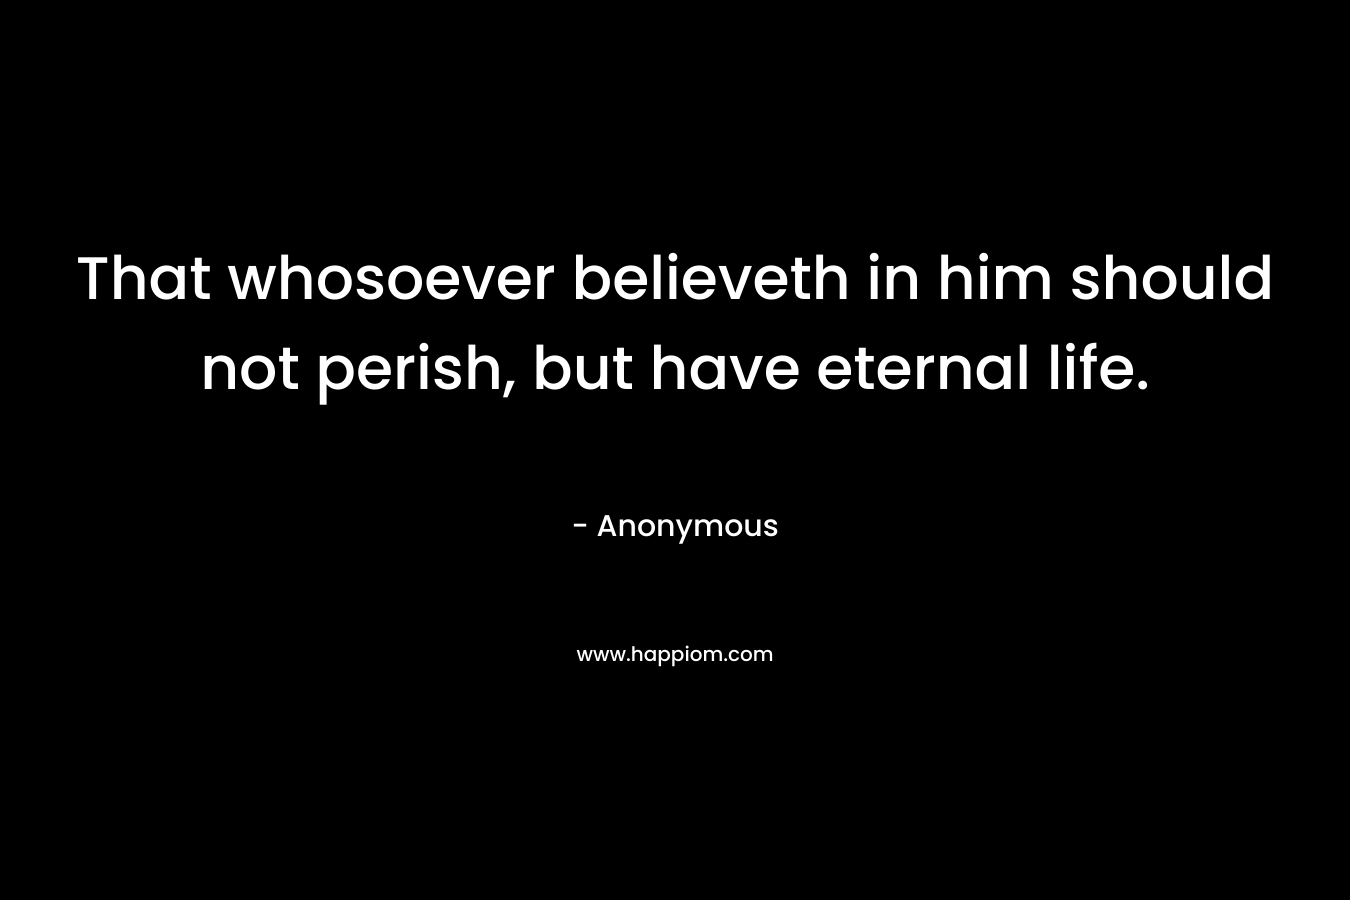 That whosoever believeth in him should not perish, but have eternal life.